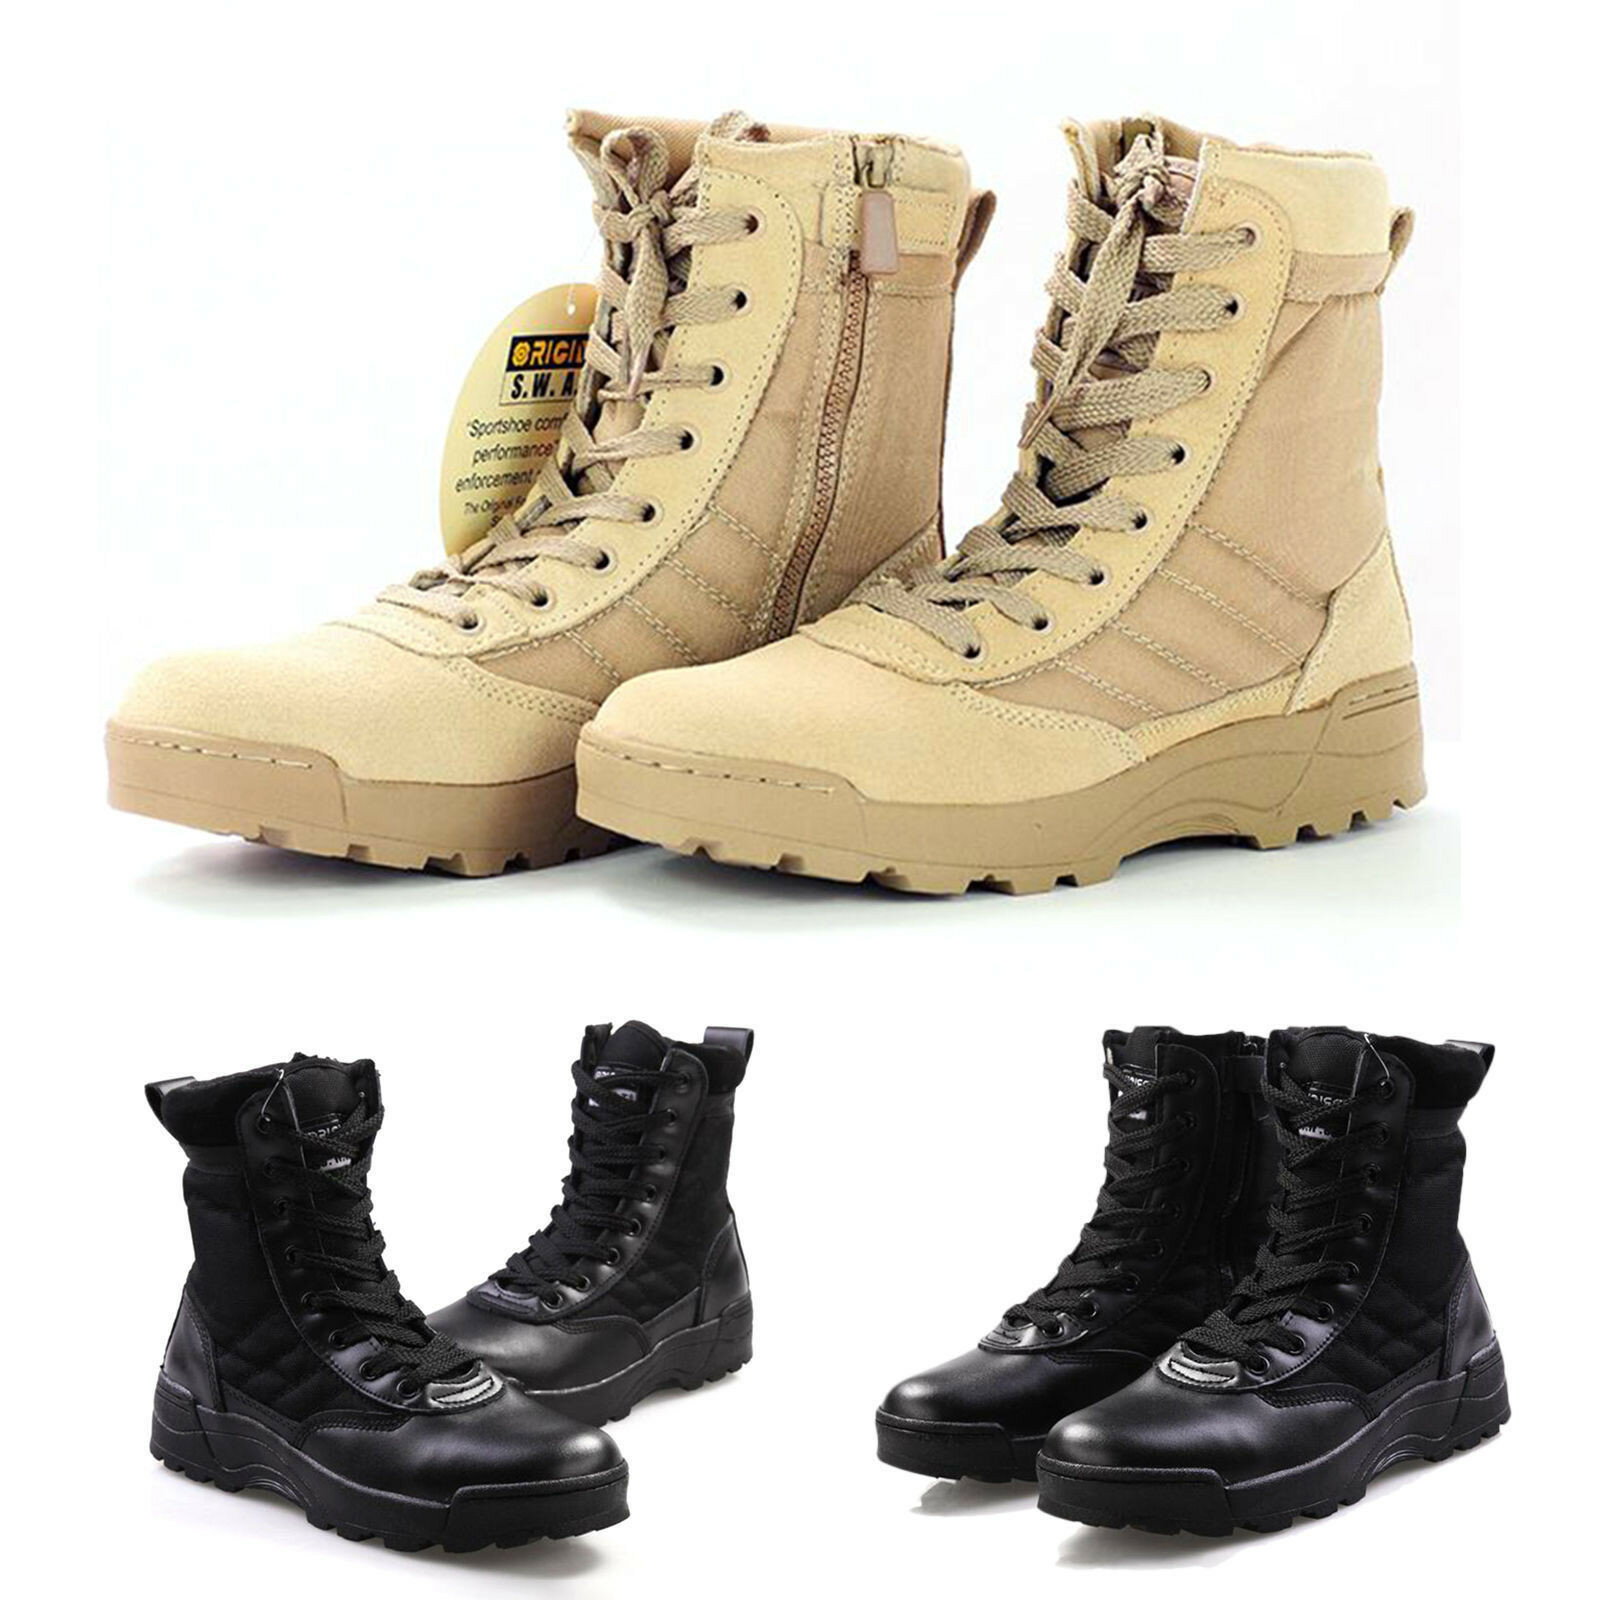 Men High Top Tactical Military Desert Army Boots Combat Hiking Shoes Outdoor